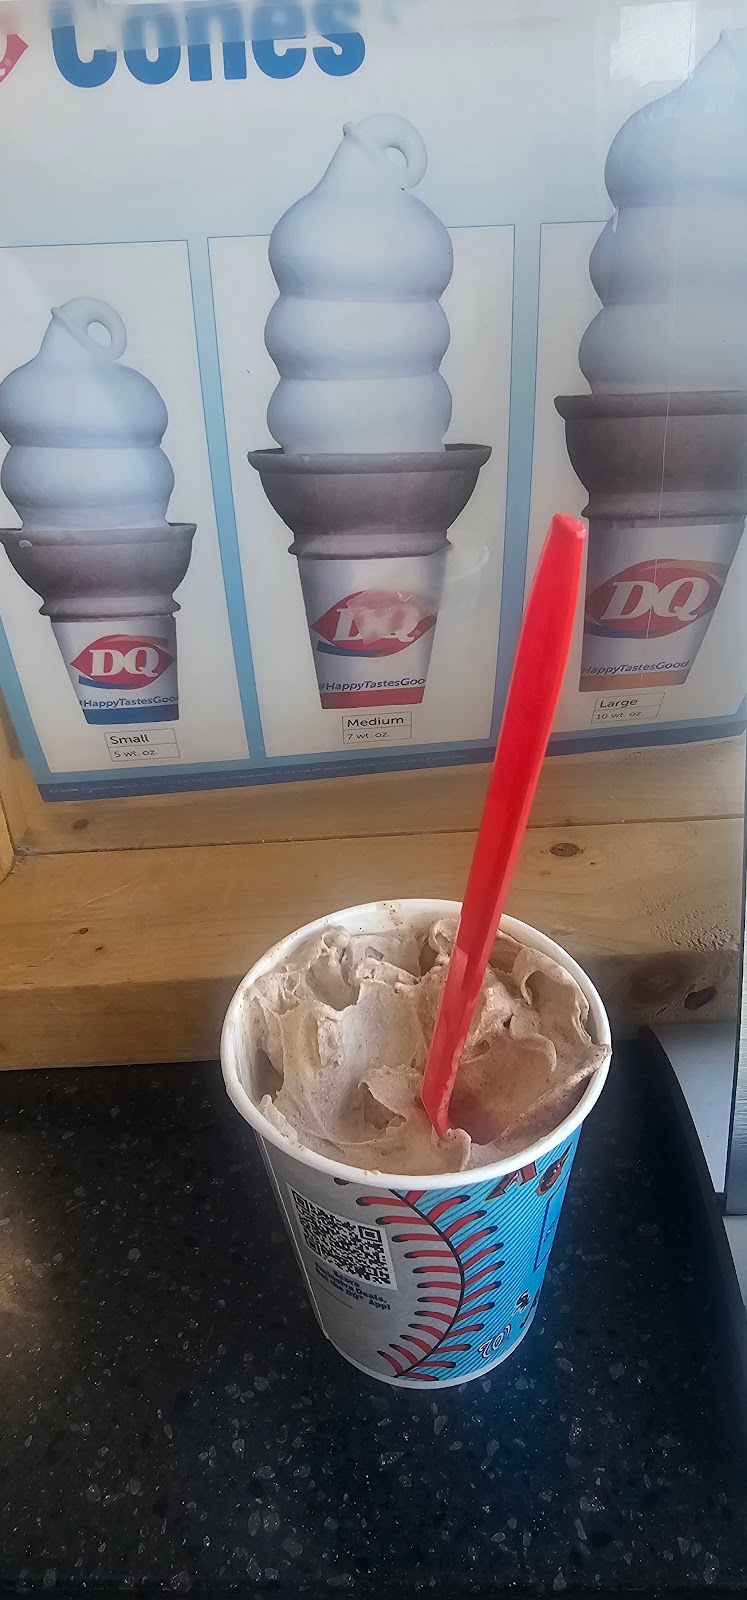 Dairy Queen (Treat) | restaurant | 306 US-61, Hannibal, MO 63401, USA | 5732218022 OR +1 573-221-8022